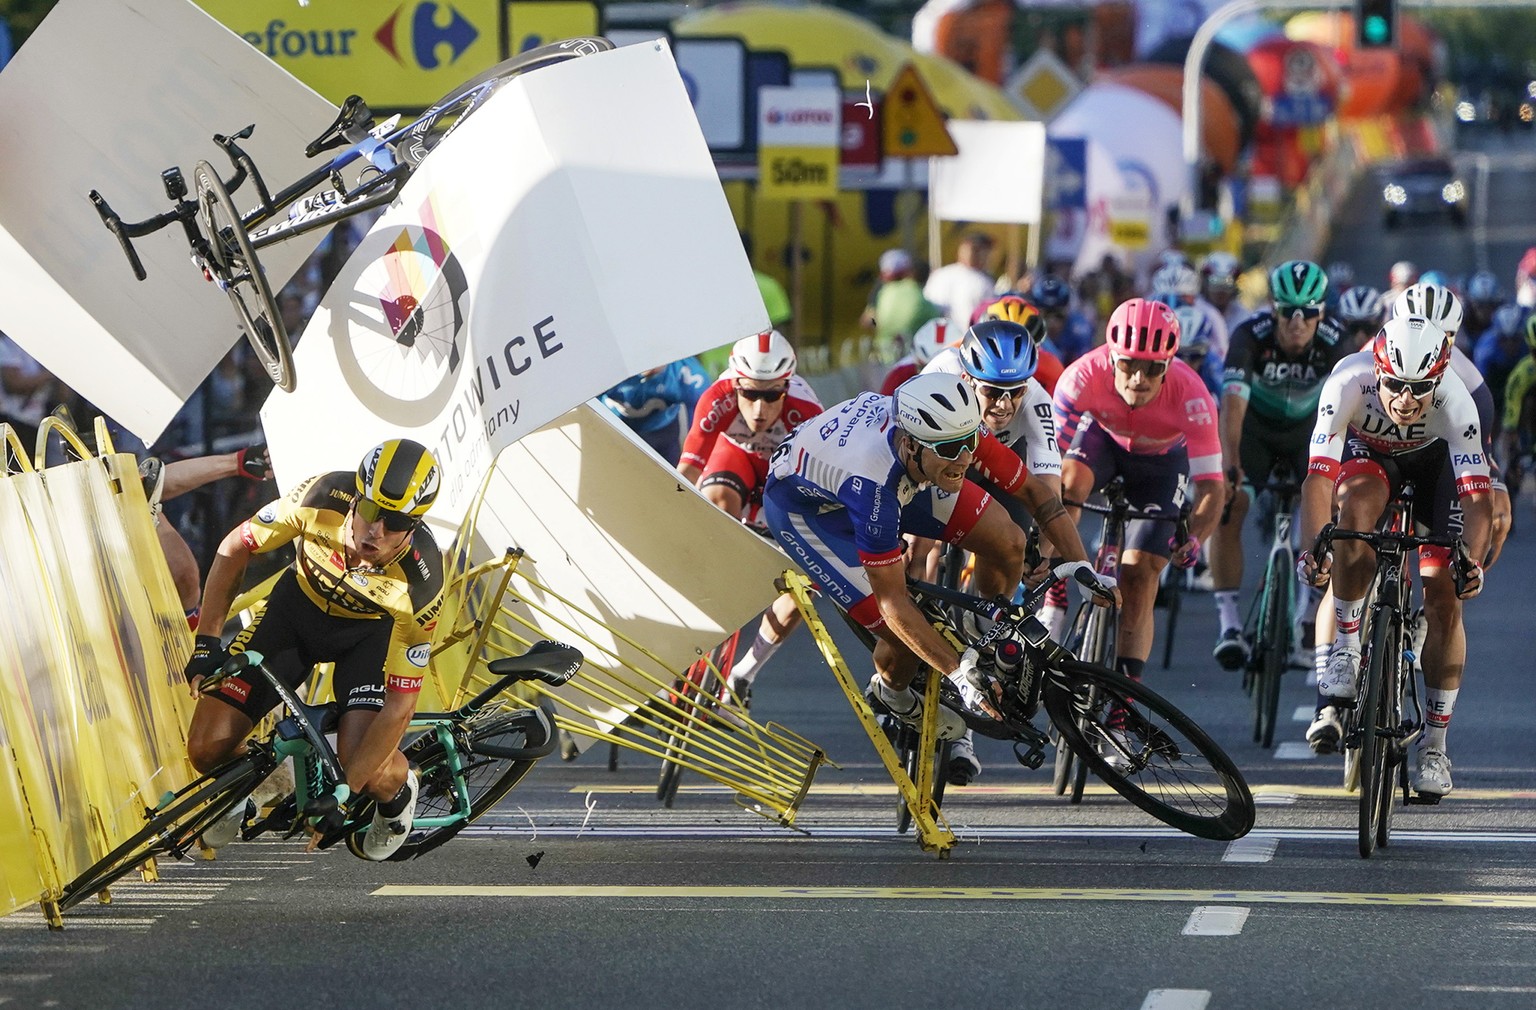 Dutch cyclist Dylan Groenewegen crashes to the ground as a bicycle is flying overhead in a major collision on the final stretch of the opening stage of the Tour de Pologne race in Katowice, Poland, We ...